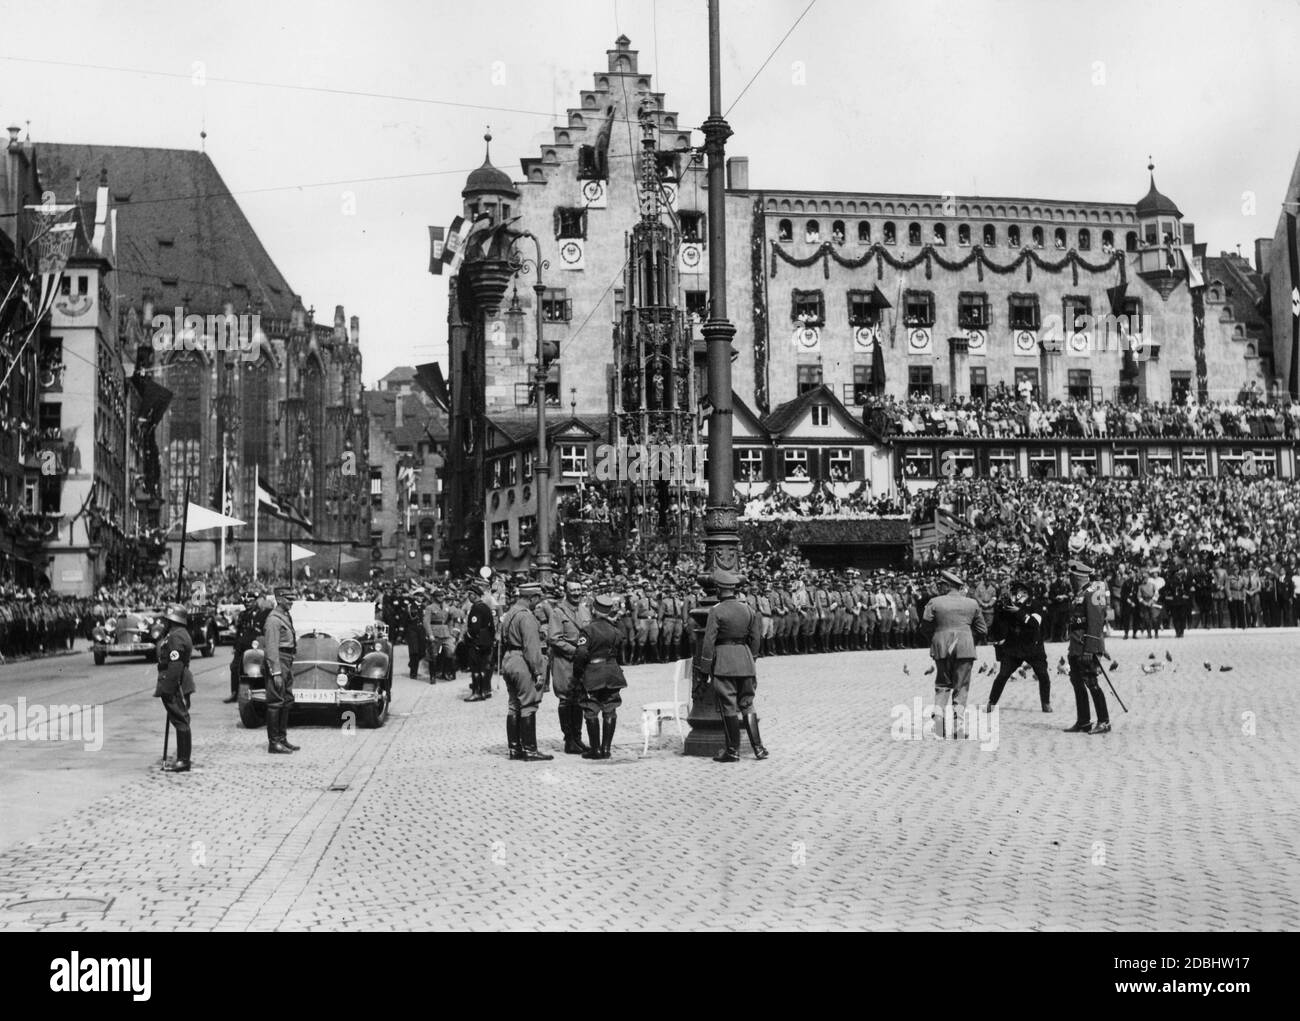 Hitler (on his left stands Viktor Lutze) greets an 80-year-old SA man on Nuremberg's main market square, the so-called Adolf-Hitler-Platz. Behind him is the Schoener Brunnen and on the right the grandstand. The scene is photographed by a photographer on the right. Stock Photo